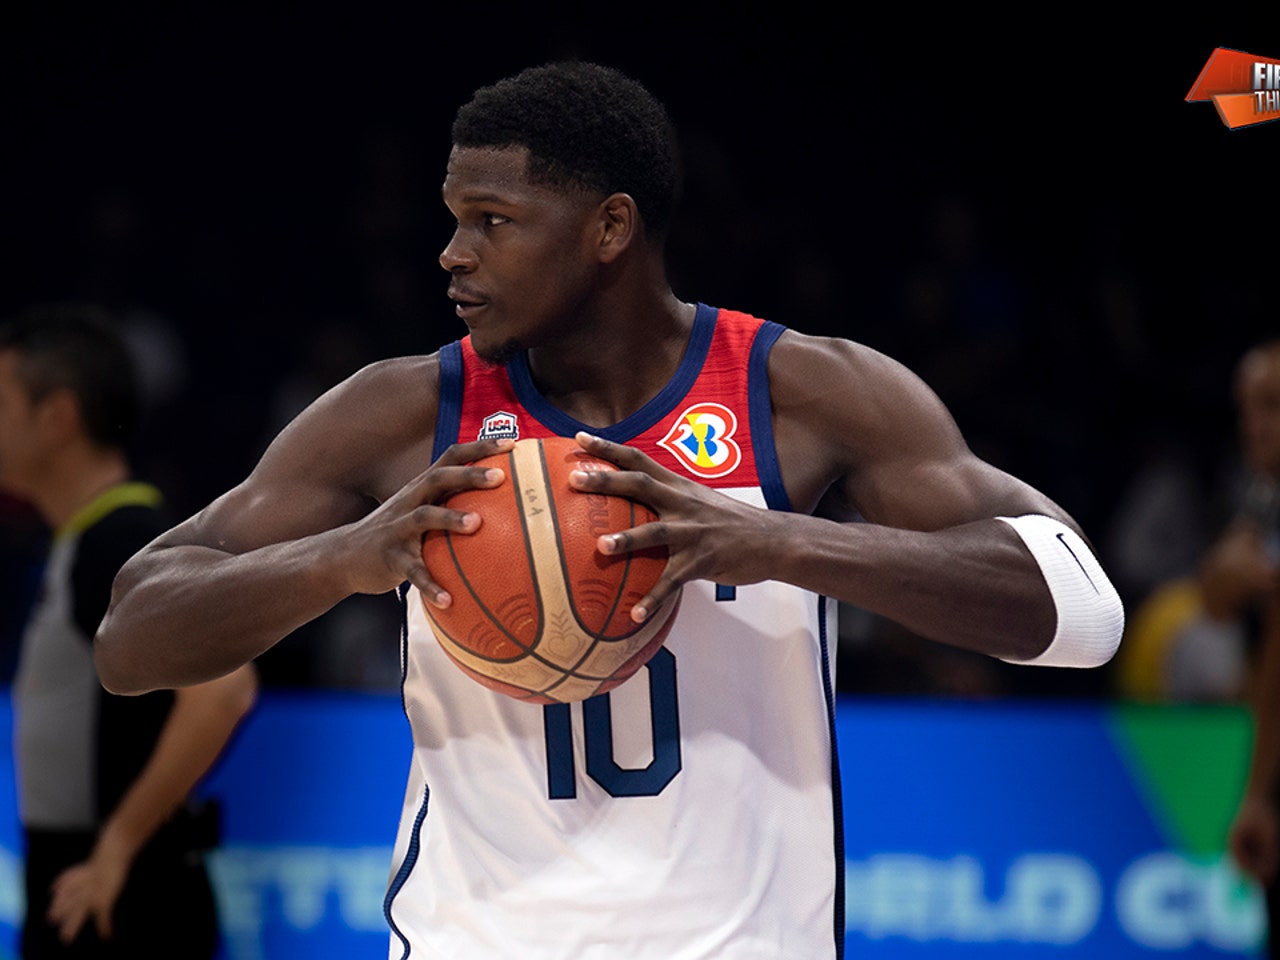 3 things to watch as USA faces Spain in FIBA exhibition